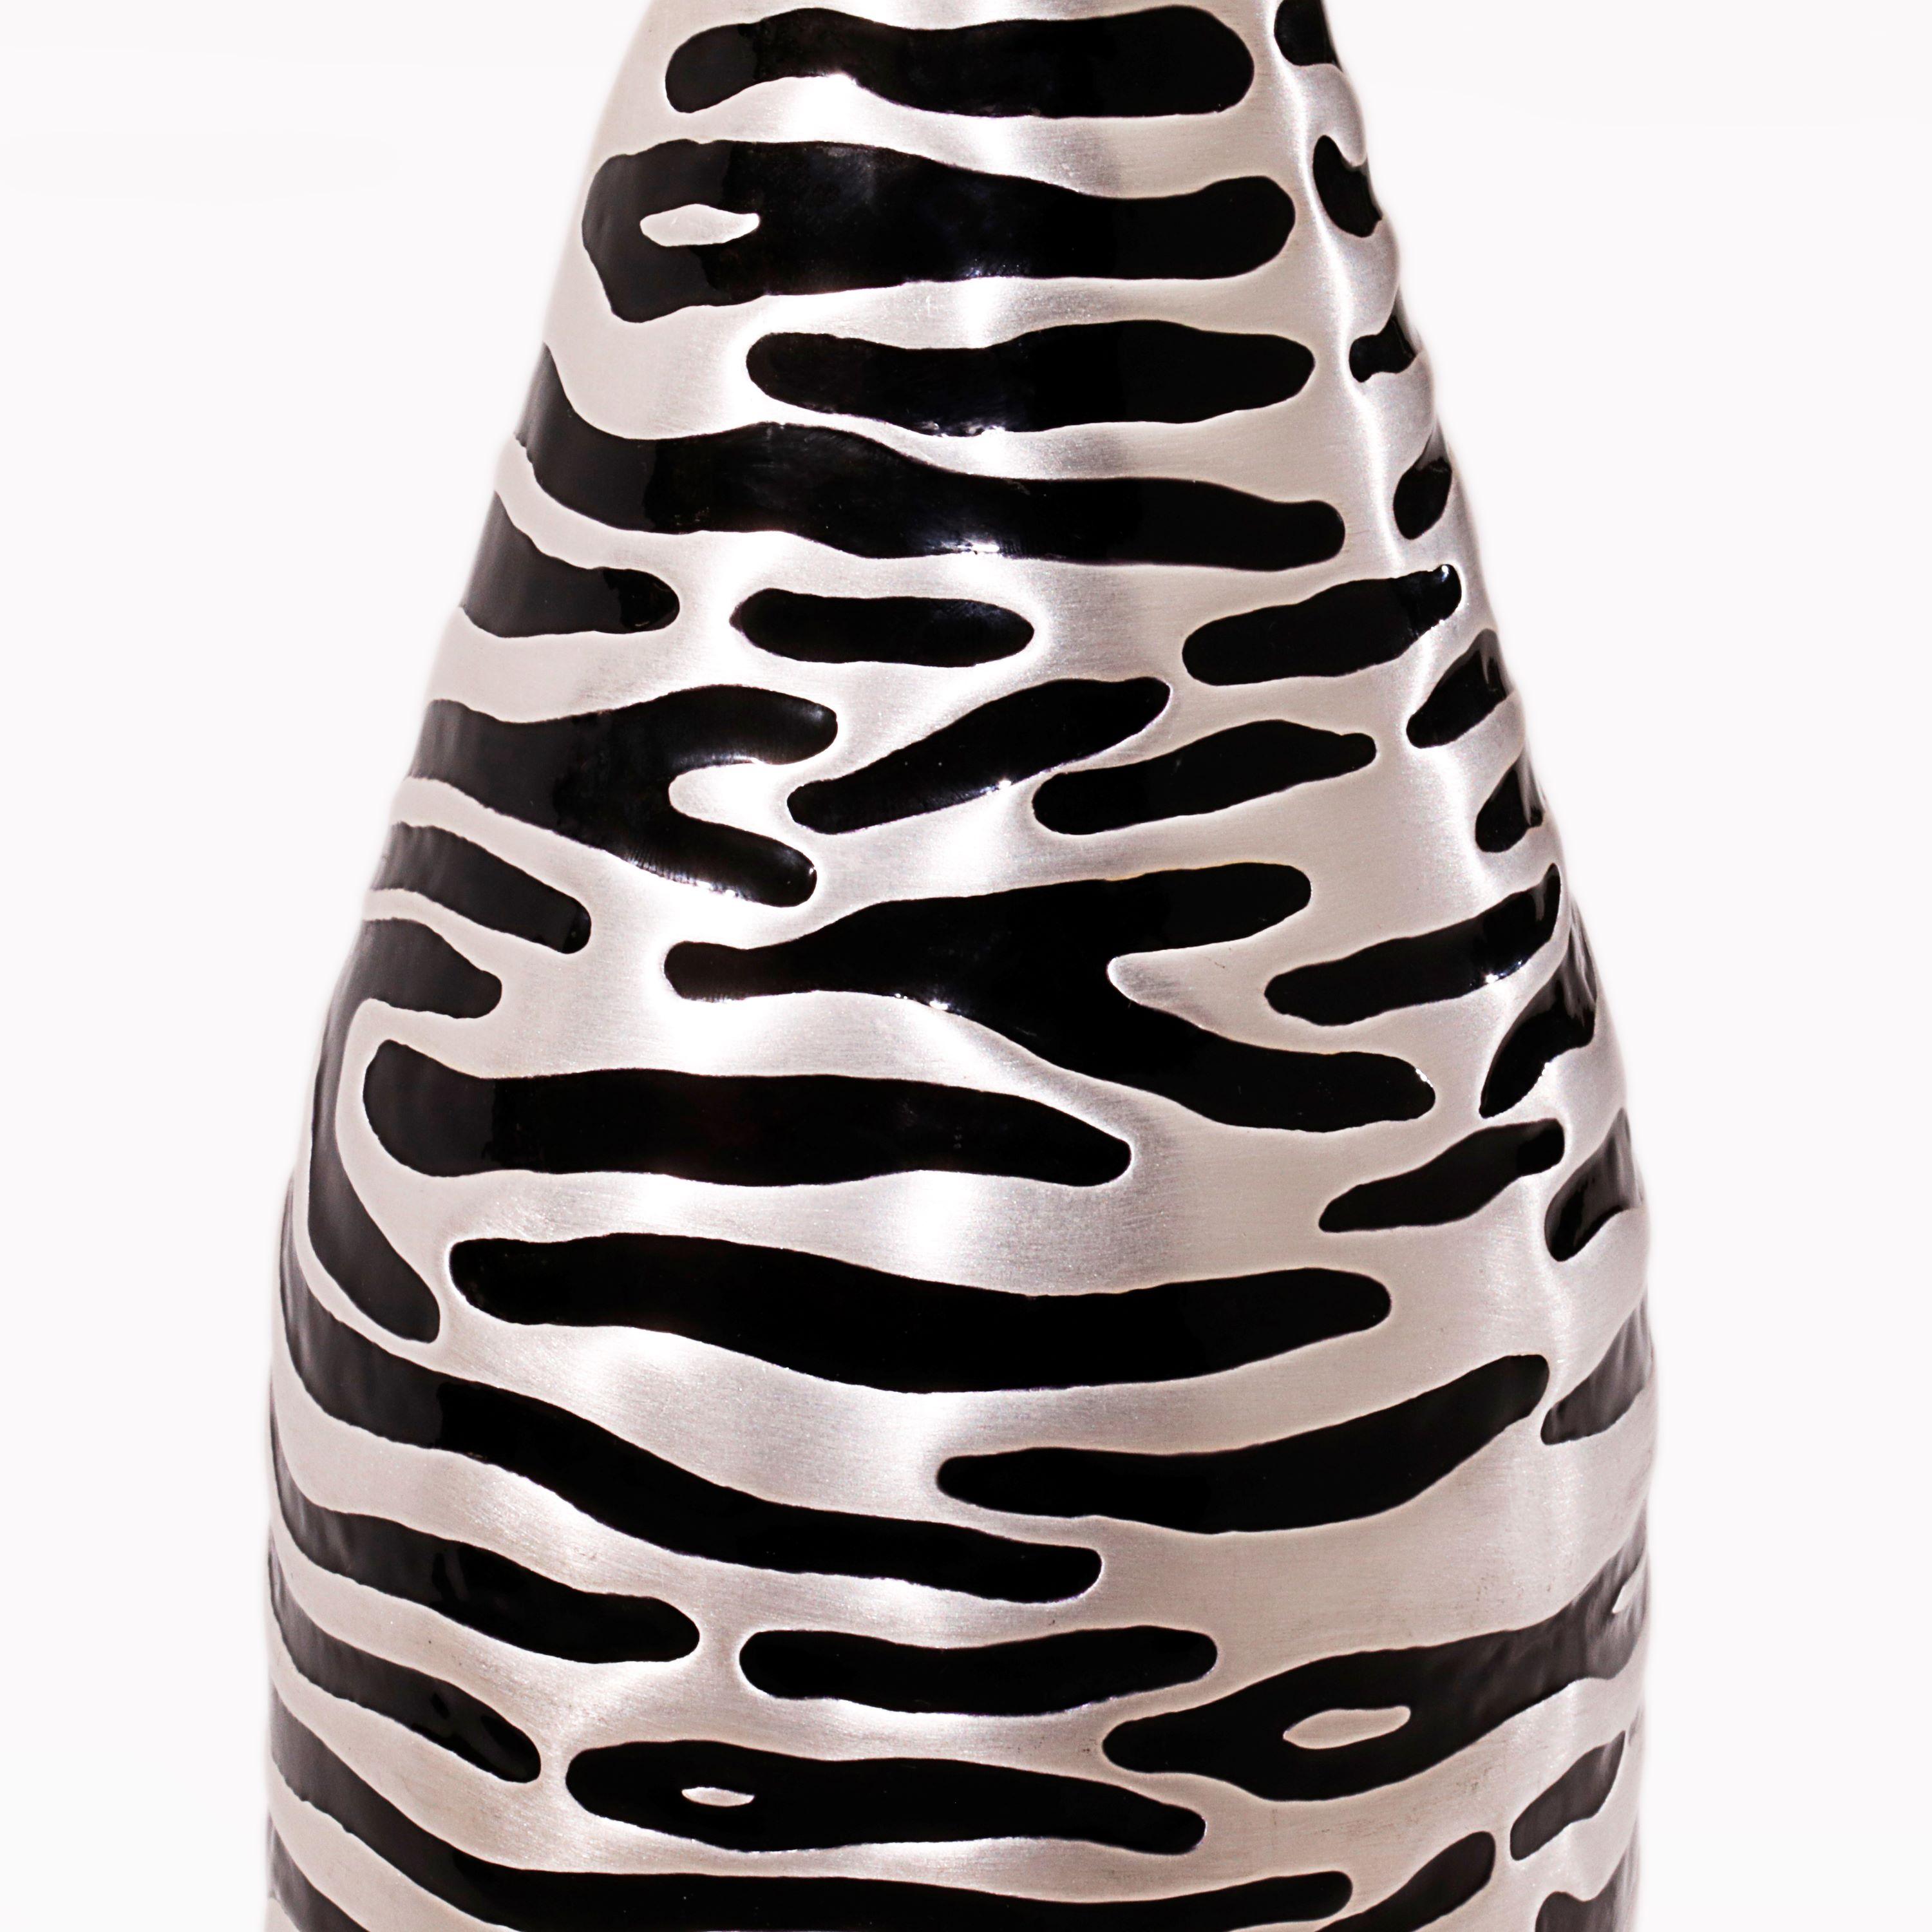 Contemporary 21st Century, Champagne cover, Solid pure silver, Zebra, Italy For Sale